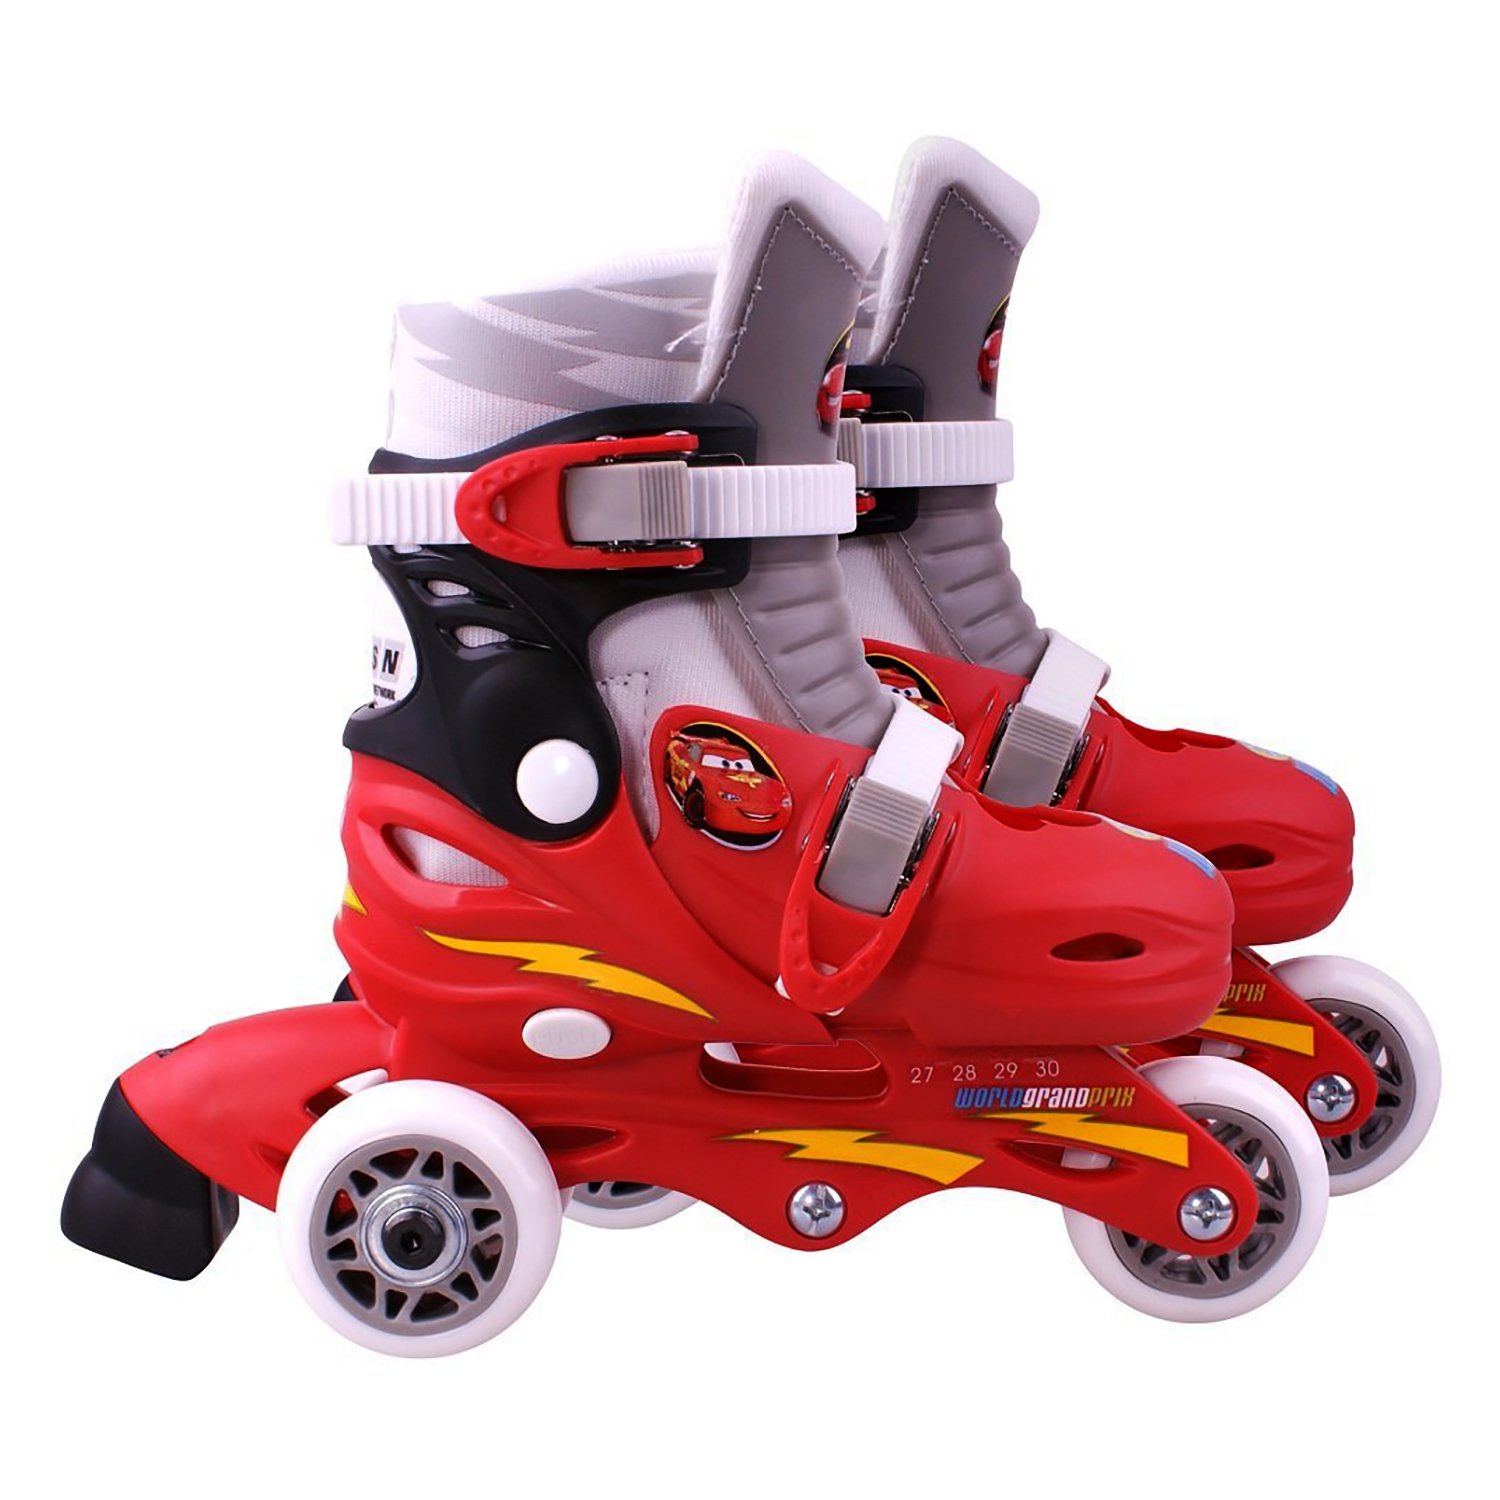 Role copii 2 in 1 STAMP Cars 2, Marime 27 – 30 Disney Cars